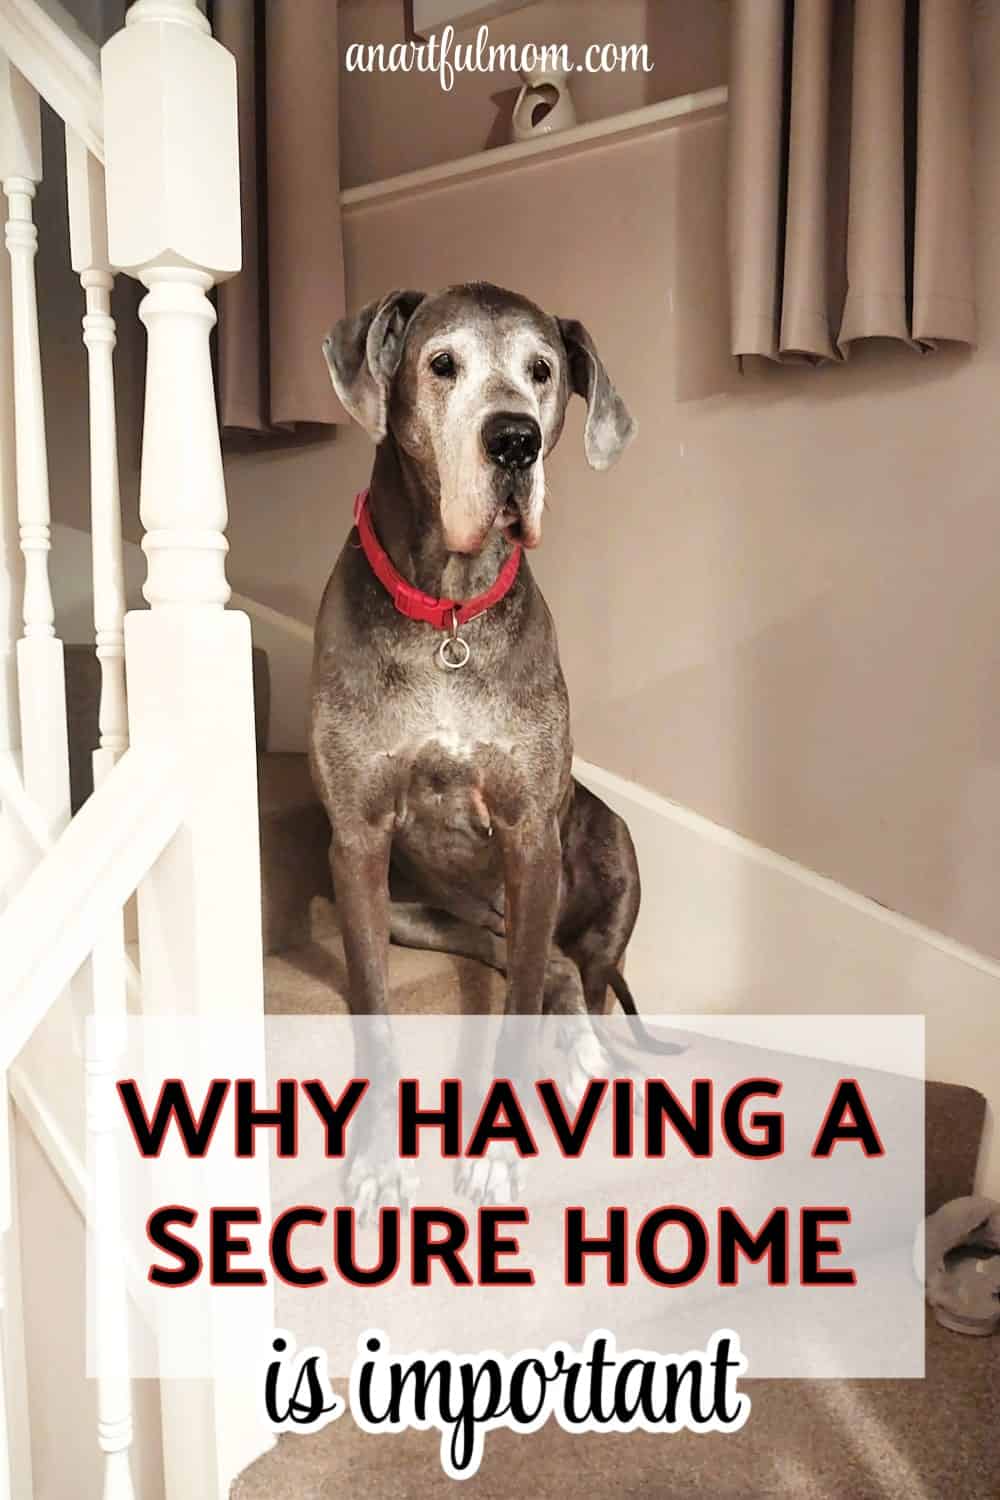 Why Having a Secure Home is Important